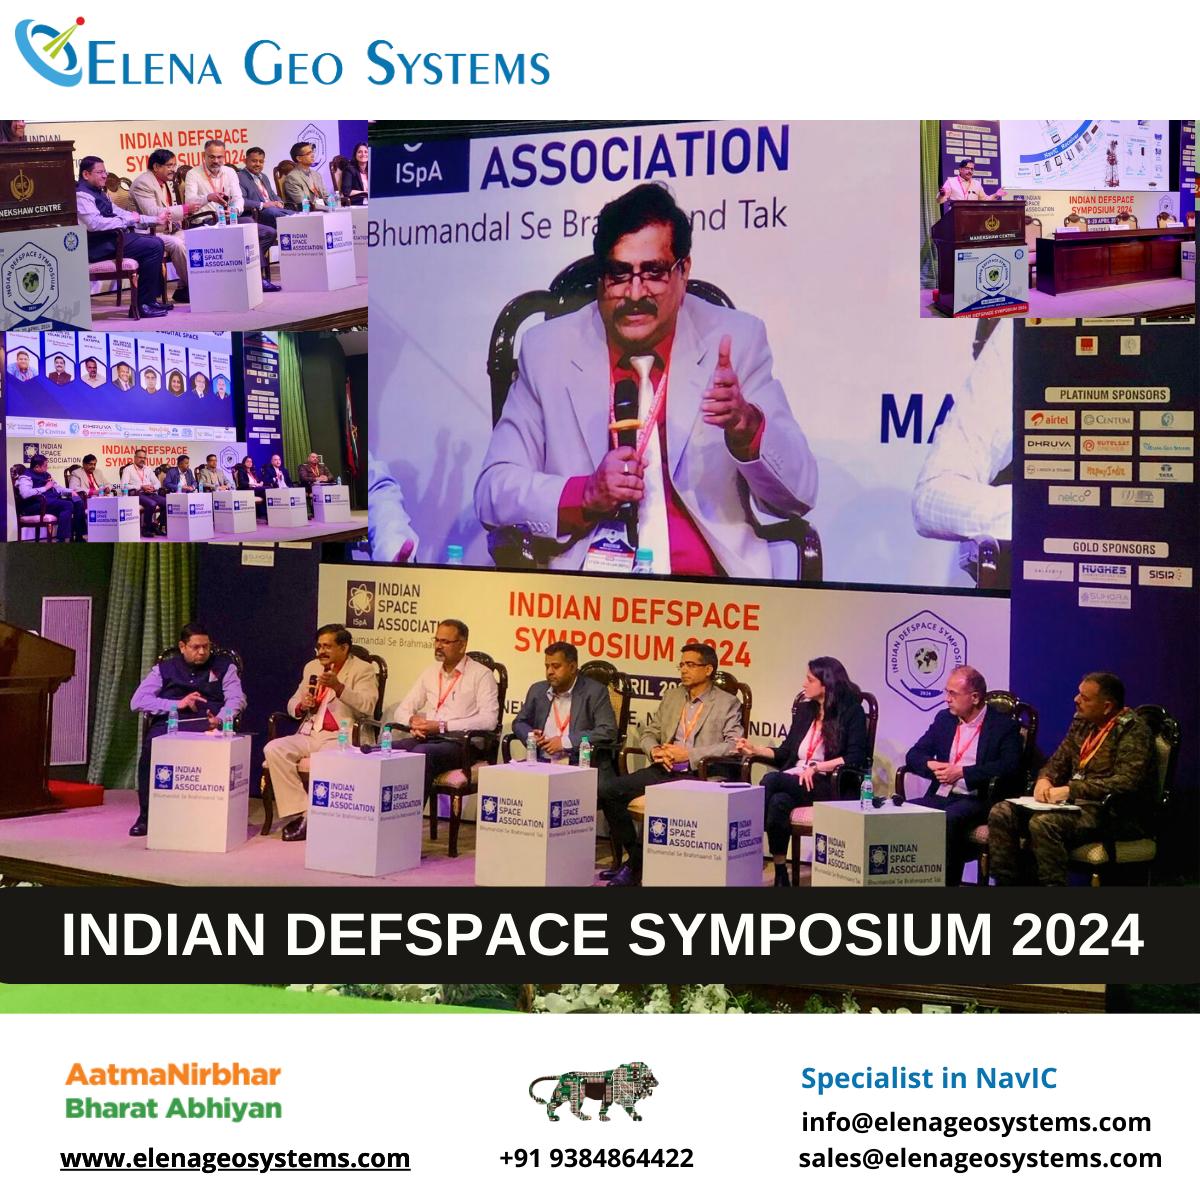 The symposium brought together leading figures from the defense and space sectors to discuss critical issues and opportunities in the emerging #DefSpace domain. Our founder, Lt Col Velan (Retd), at DefSpace Symposium by #ISPA! #ElenaGeoSystems #SpaceTech #NavIC